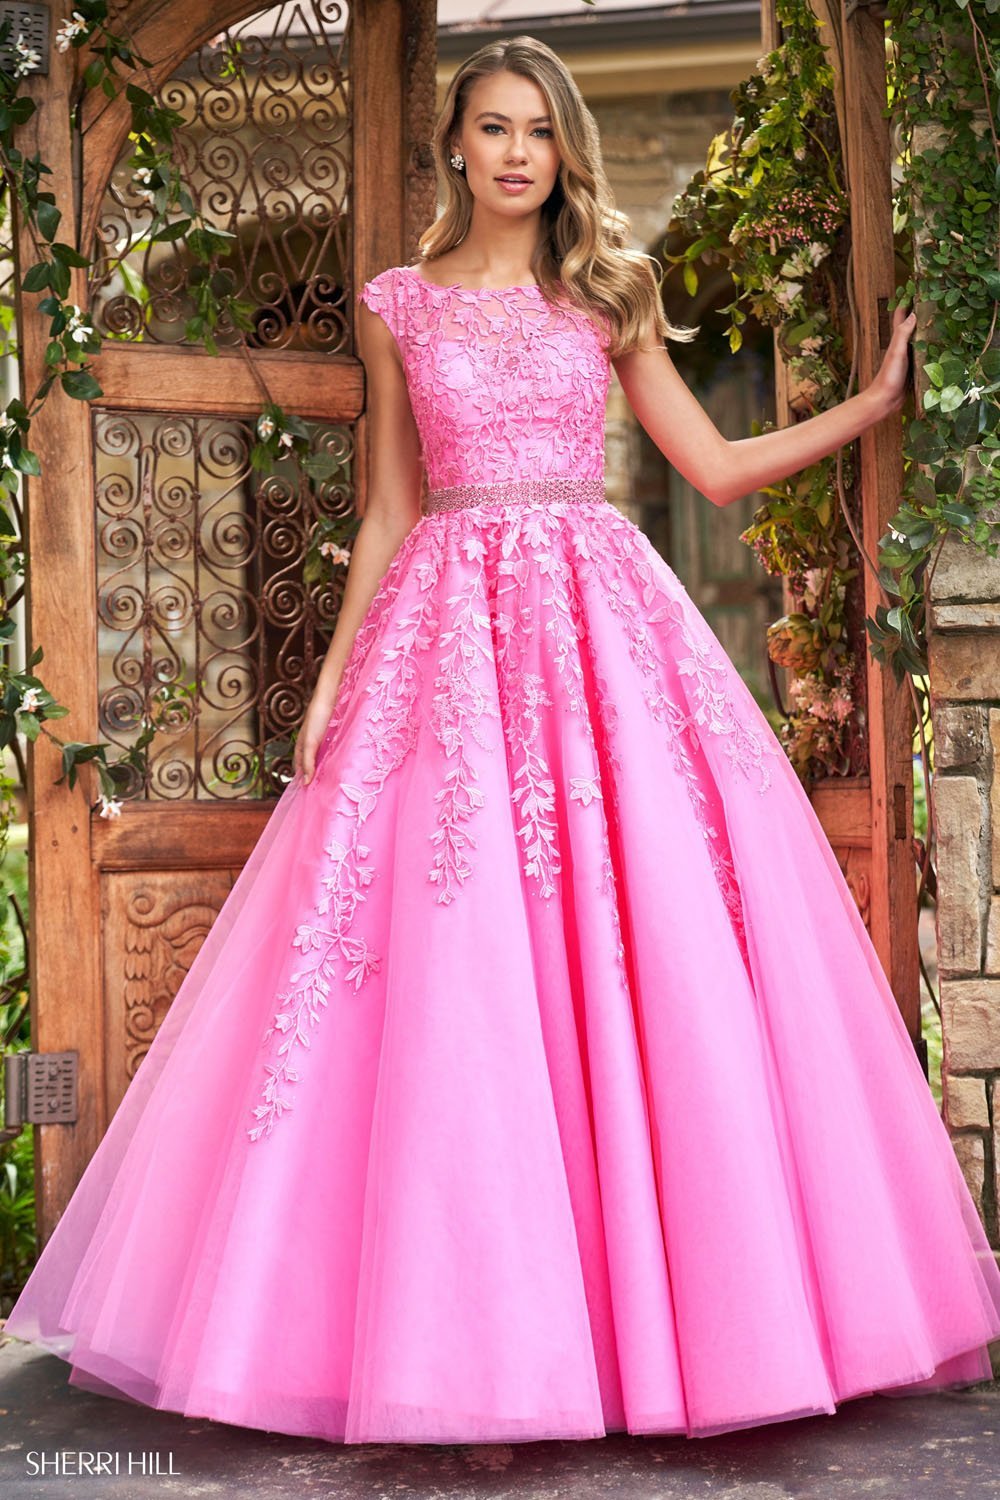 Sherri Hill 53356 dress images in these colors: Gold, Ivory Nude, Bright Pink, Light Blue, Blush, Yellow, Coral, Lilac, Navy, Red.